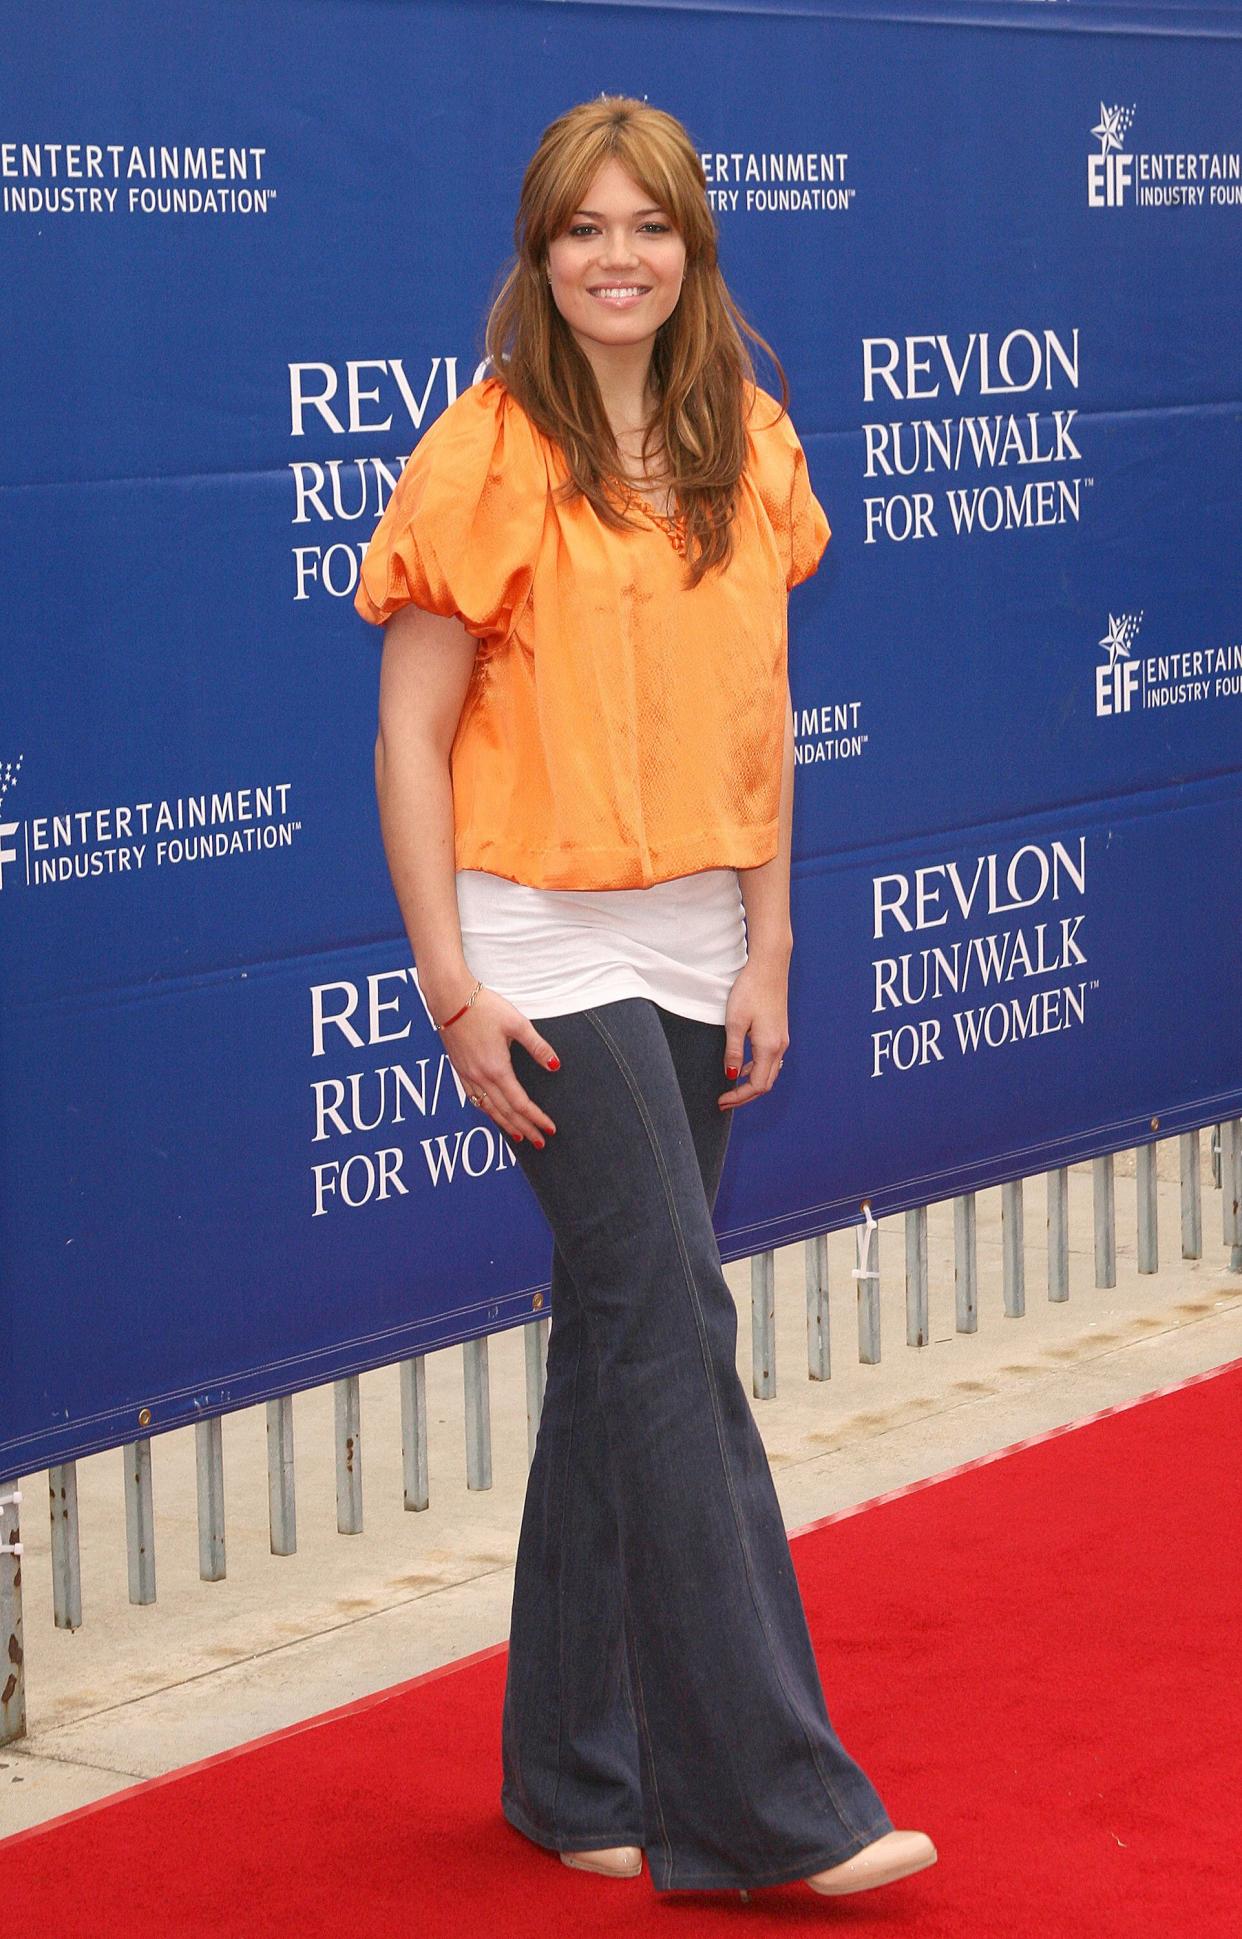 Moore at the 14th Annual Entertainment Industry Foundation Revlon Run/Walk For Women at Los Angeles Memorial Coliseum.